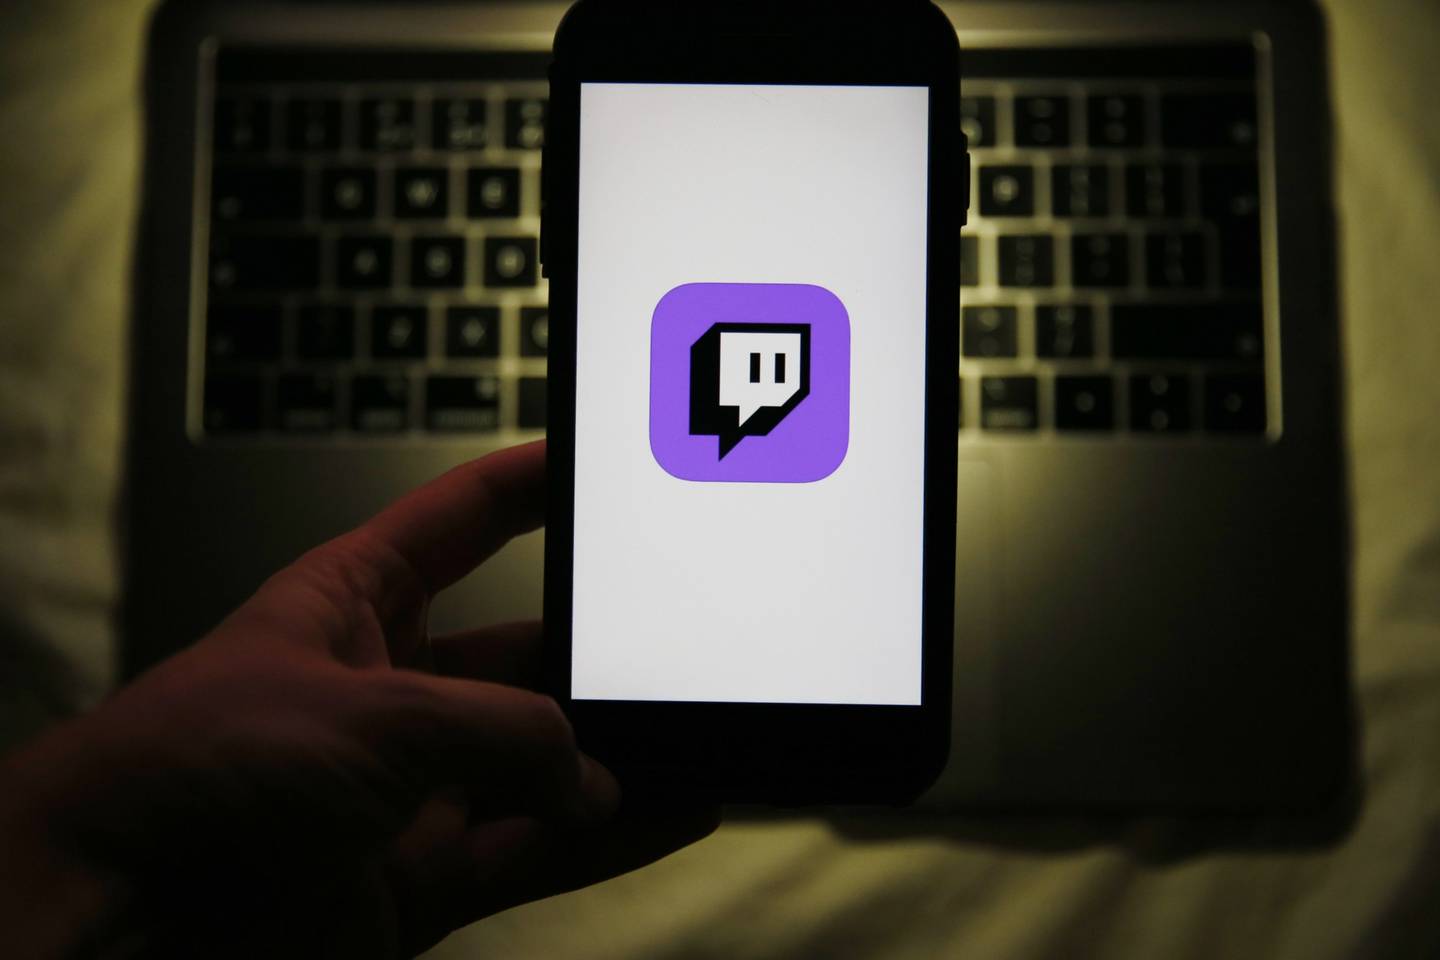 A smartphone displays a logo for the Twitch streaming app, operated by Amazon.com Inc., in this arranged photograph in London, U.K., on Thursday, Sept. 17, 2020.